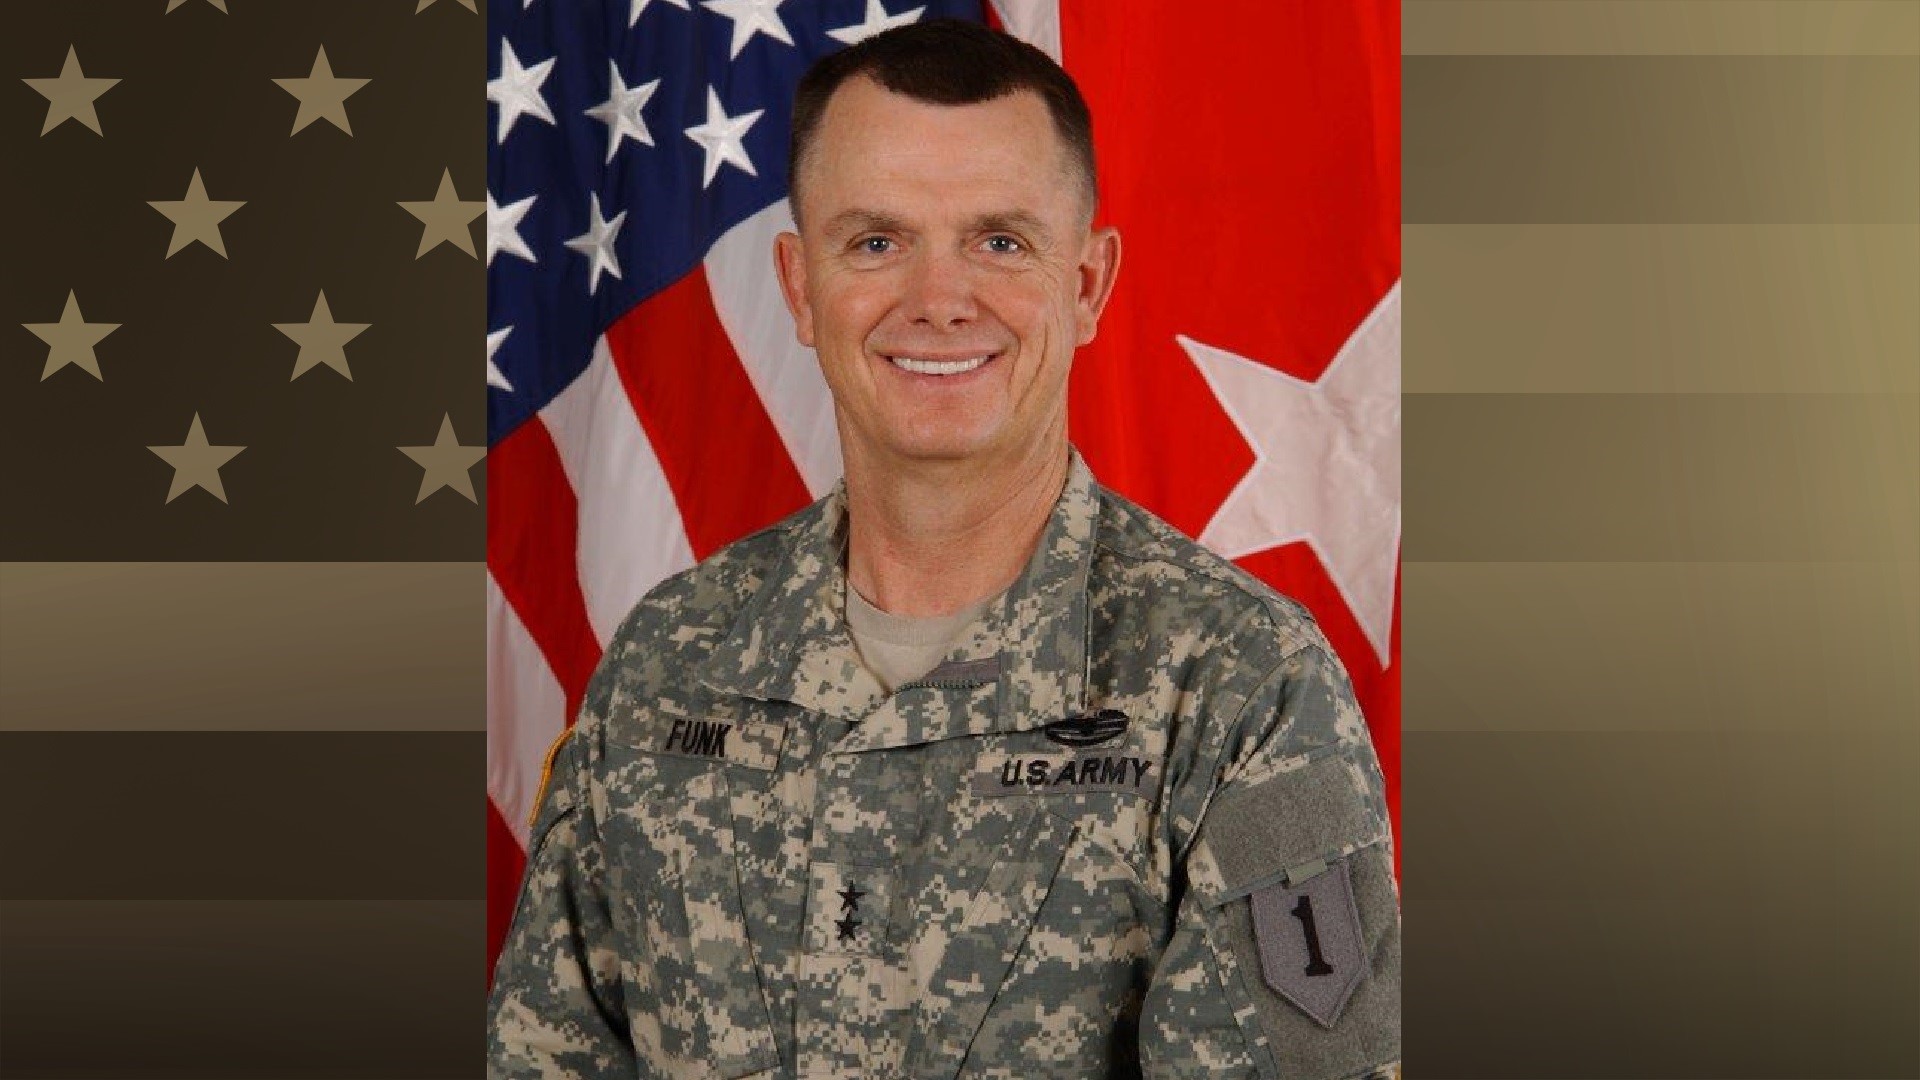 General Funk shared his thoughts on withdrawing troops from Syria and told Channel 6 what it feels like to be on the ground overseas.